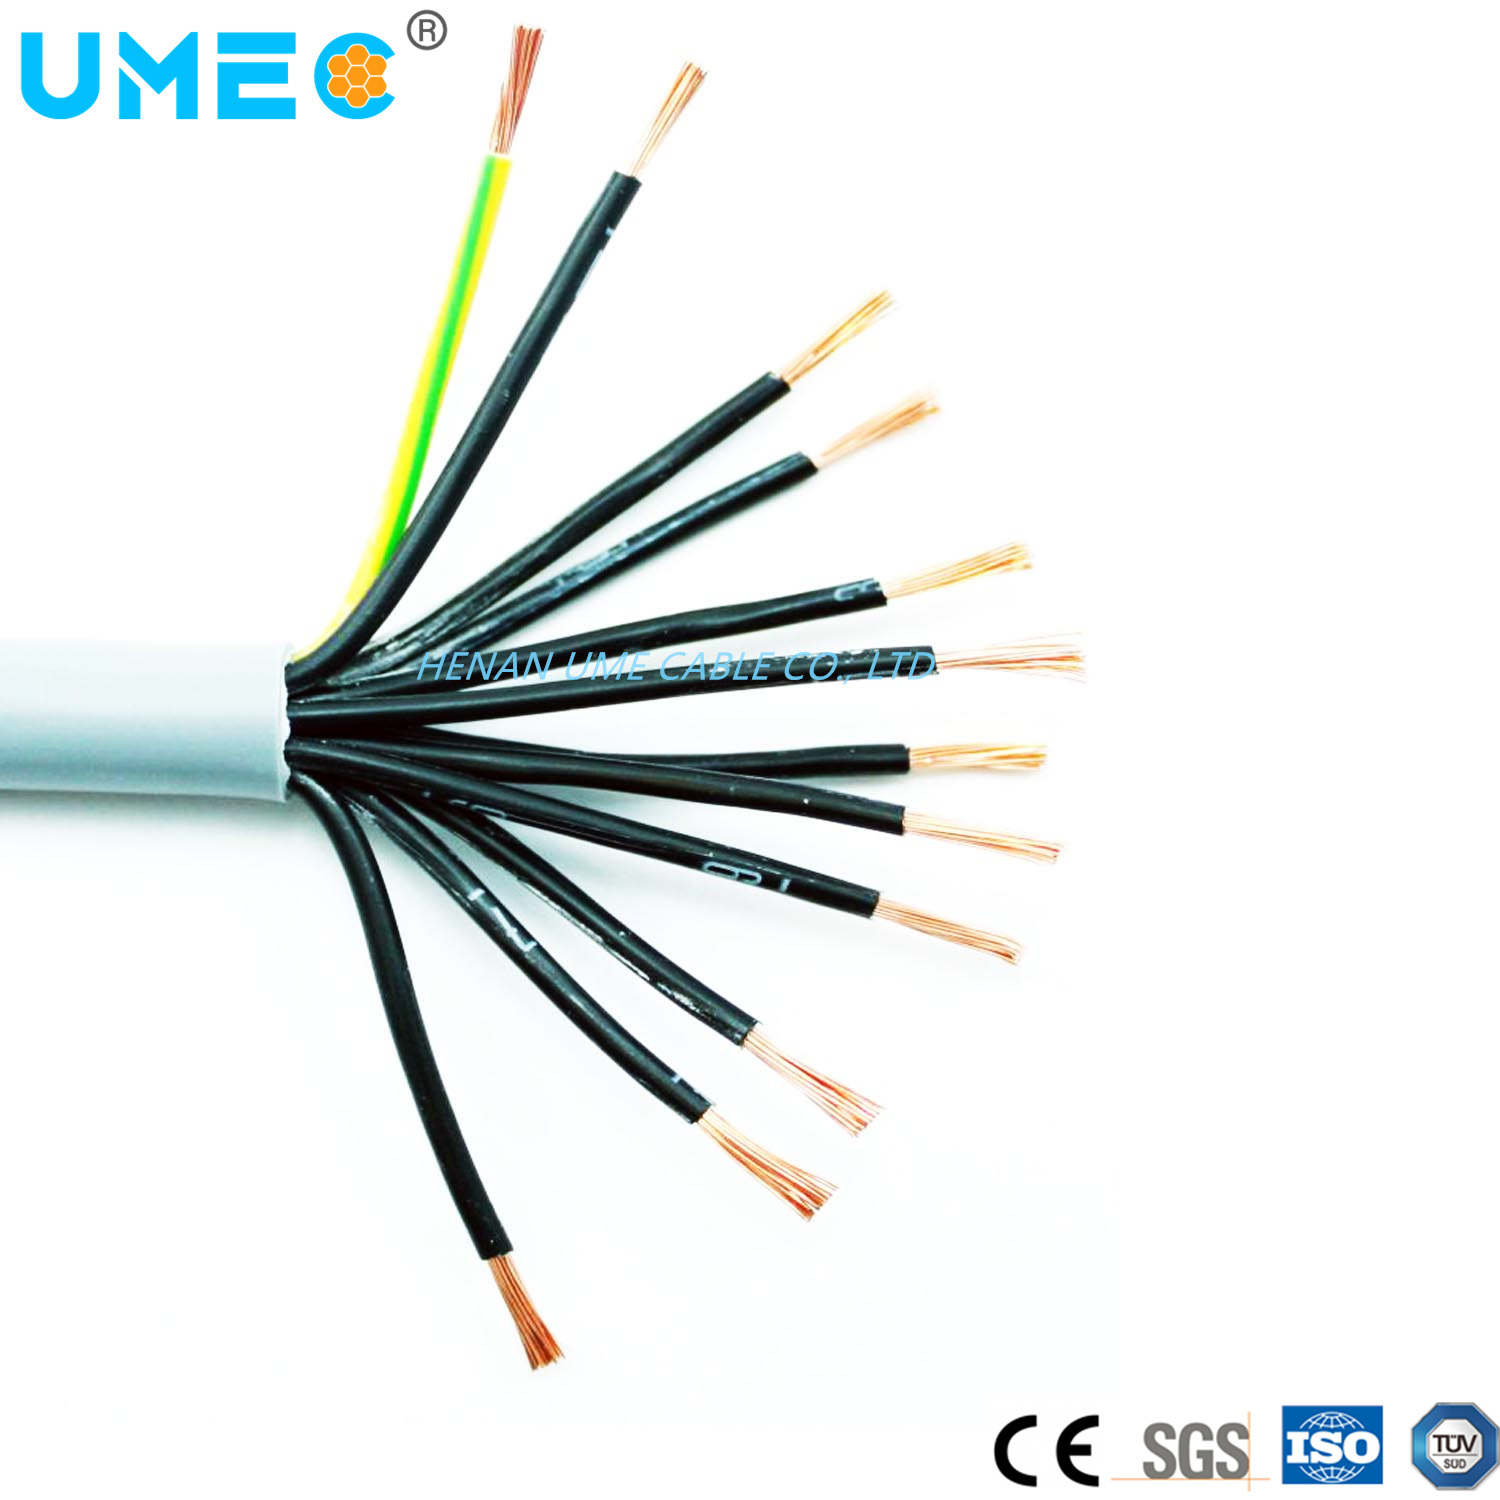 IEC Outstanding Underground Control Cable Ysly-Jz/-Jb/-Oz/-Ob PVC Insulated PVC Jacket Flexible Copper Control Cable 2/4/7/10/12X1.0 1.5 2.5 4 6mm2